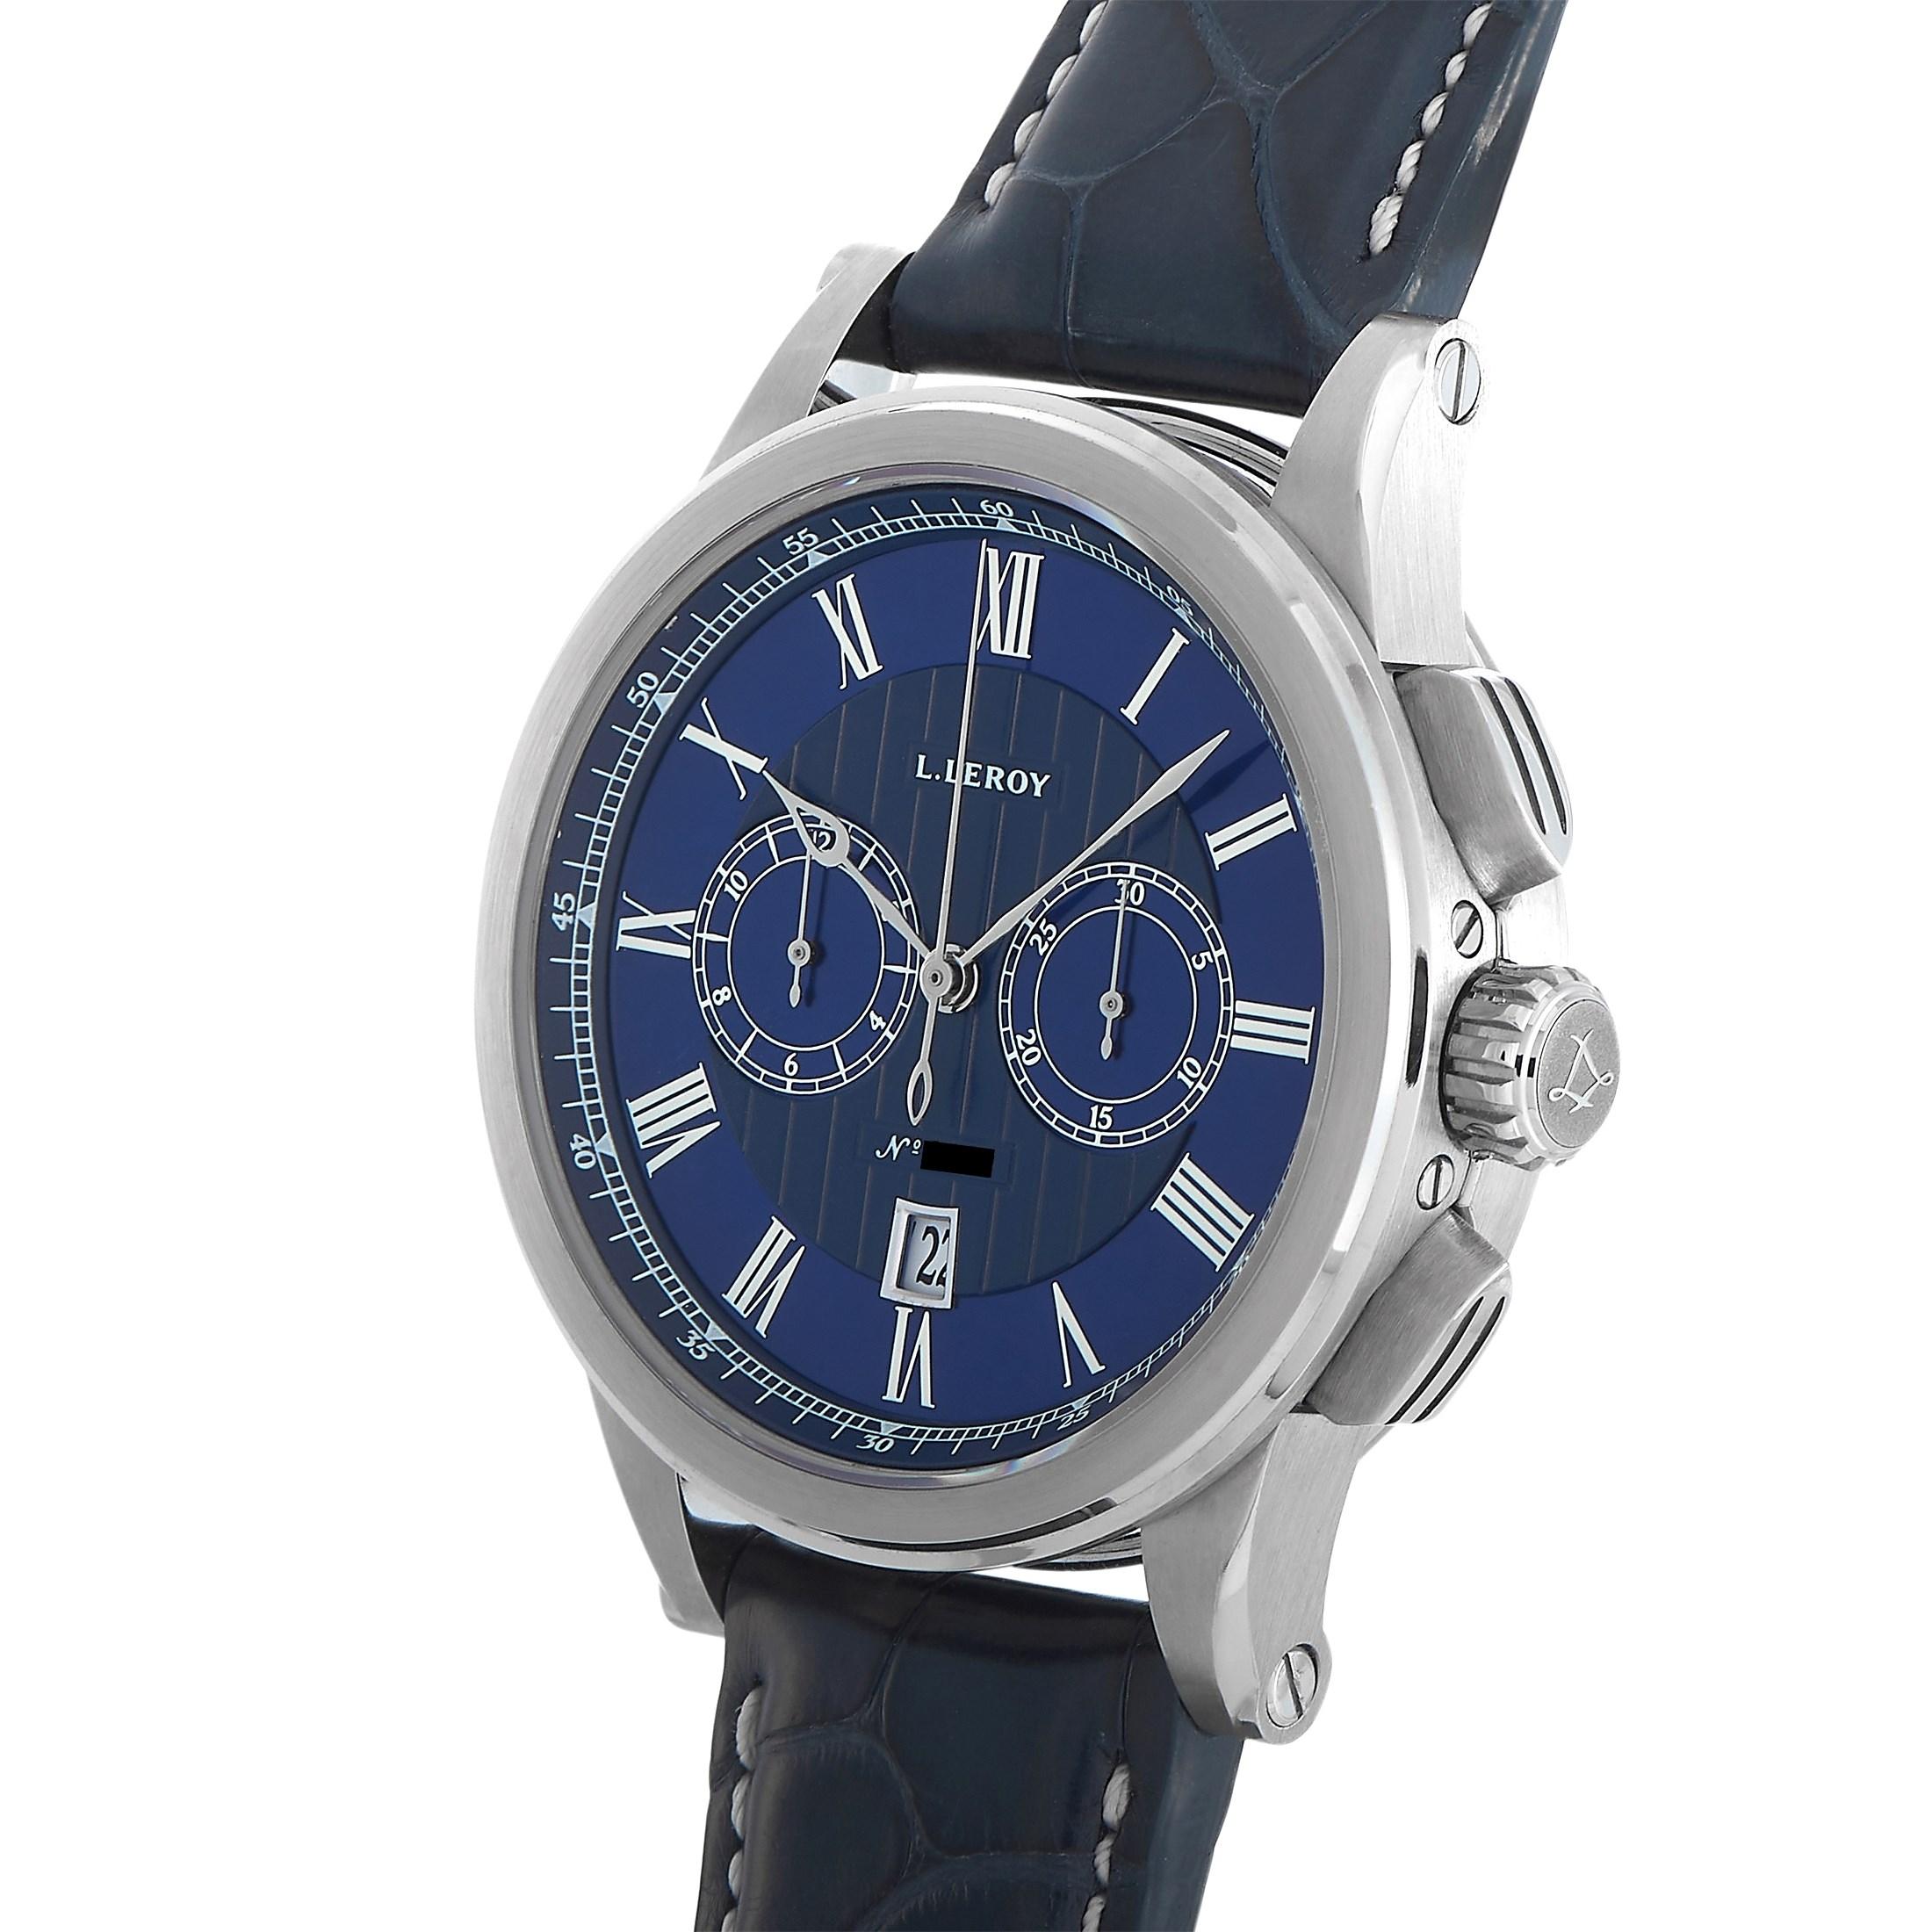 The L. Leroy 18K White Gold Marine Chronographe Blue Dial Men's Chronograph Watch LL202/3 features a 43mm white gold case that's 12.8mm thick. This self-winding watch has a 37-jewel automatic movement that offers a power reserve of 42 hours.